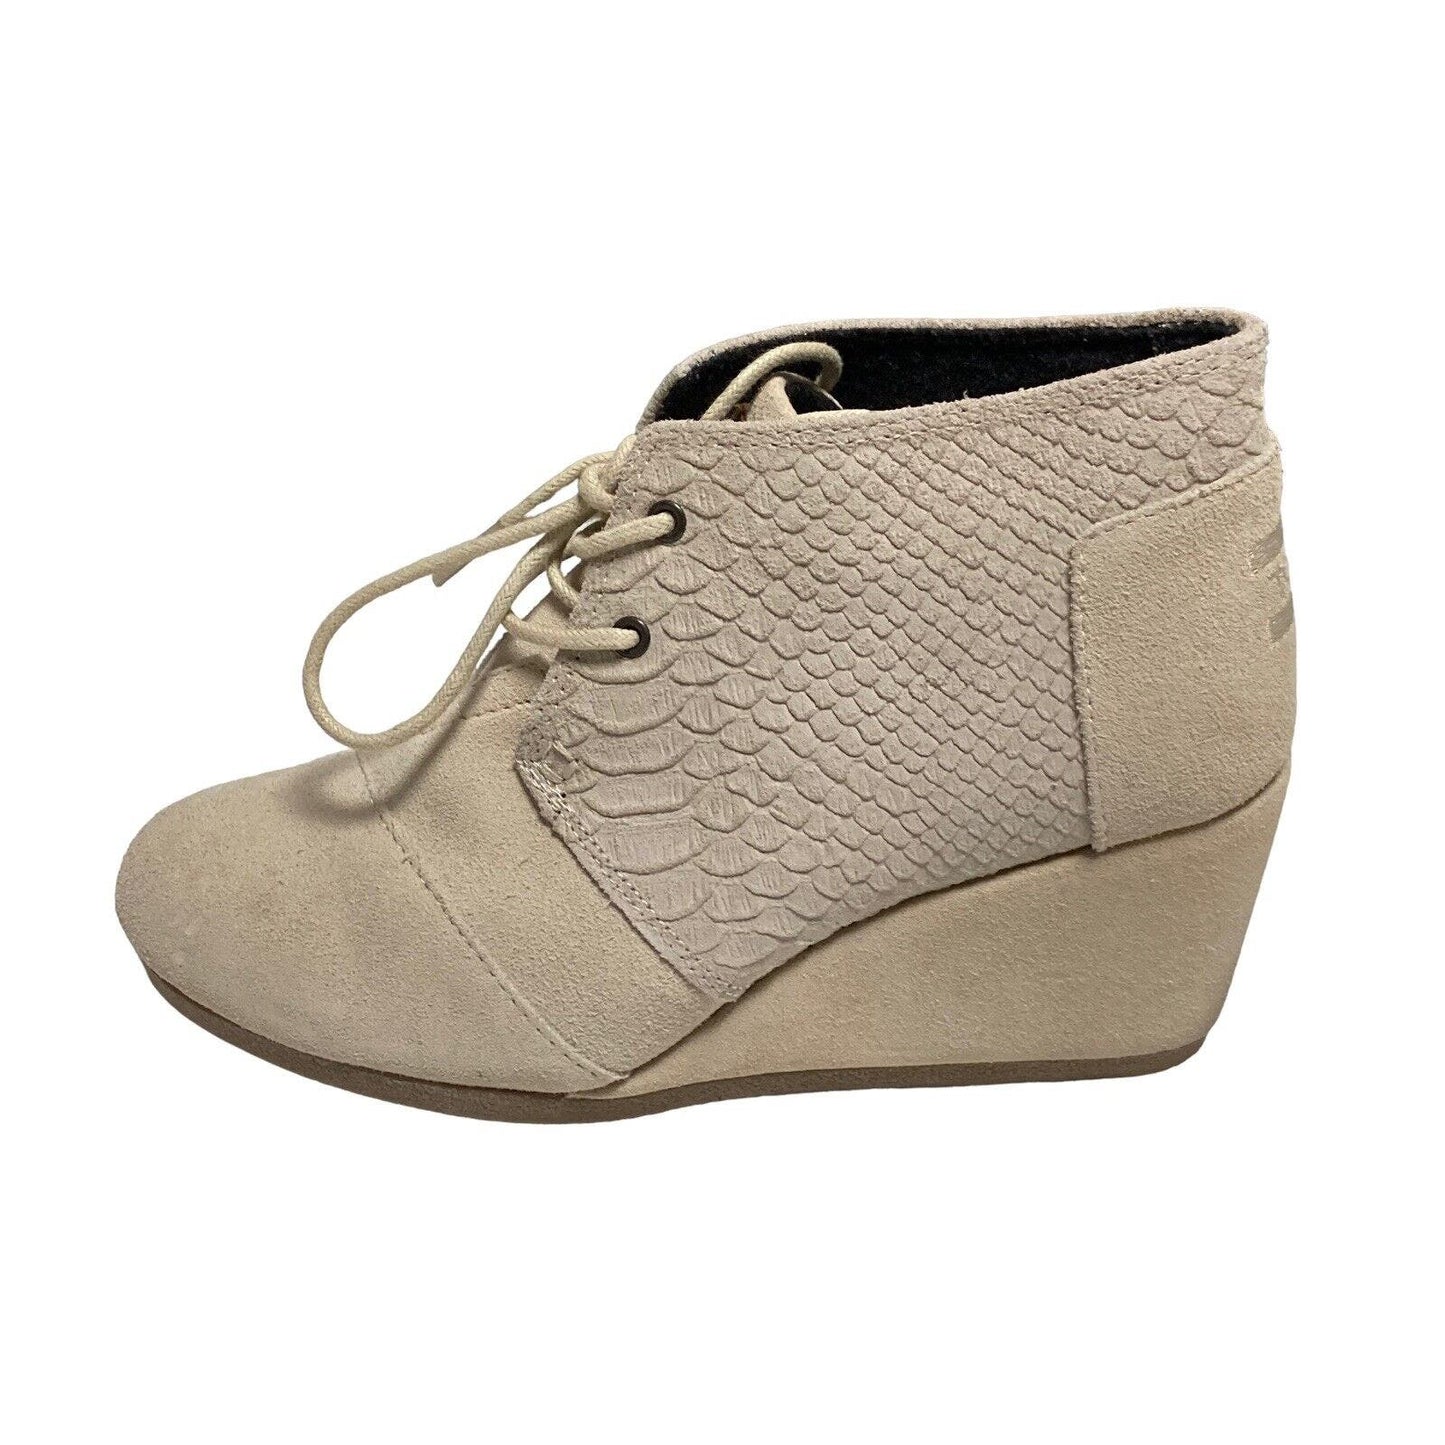 Toms Desert Wedge Cream Shoes Size 7 Women’s Lace Up Suede